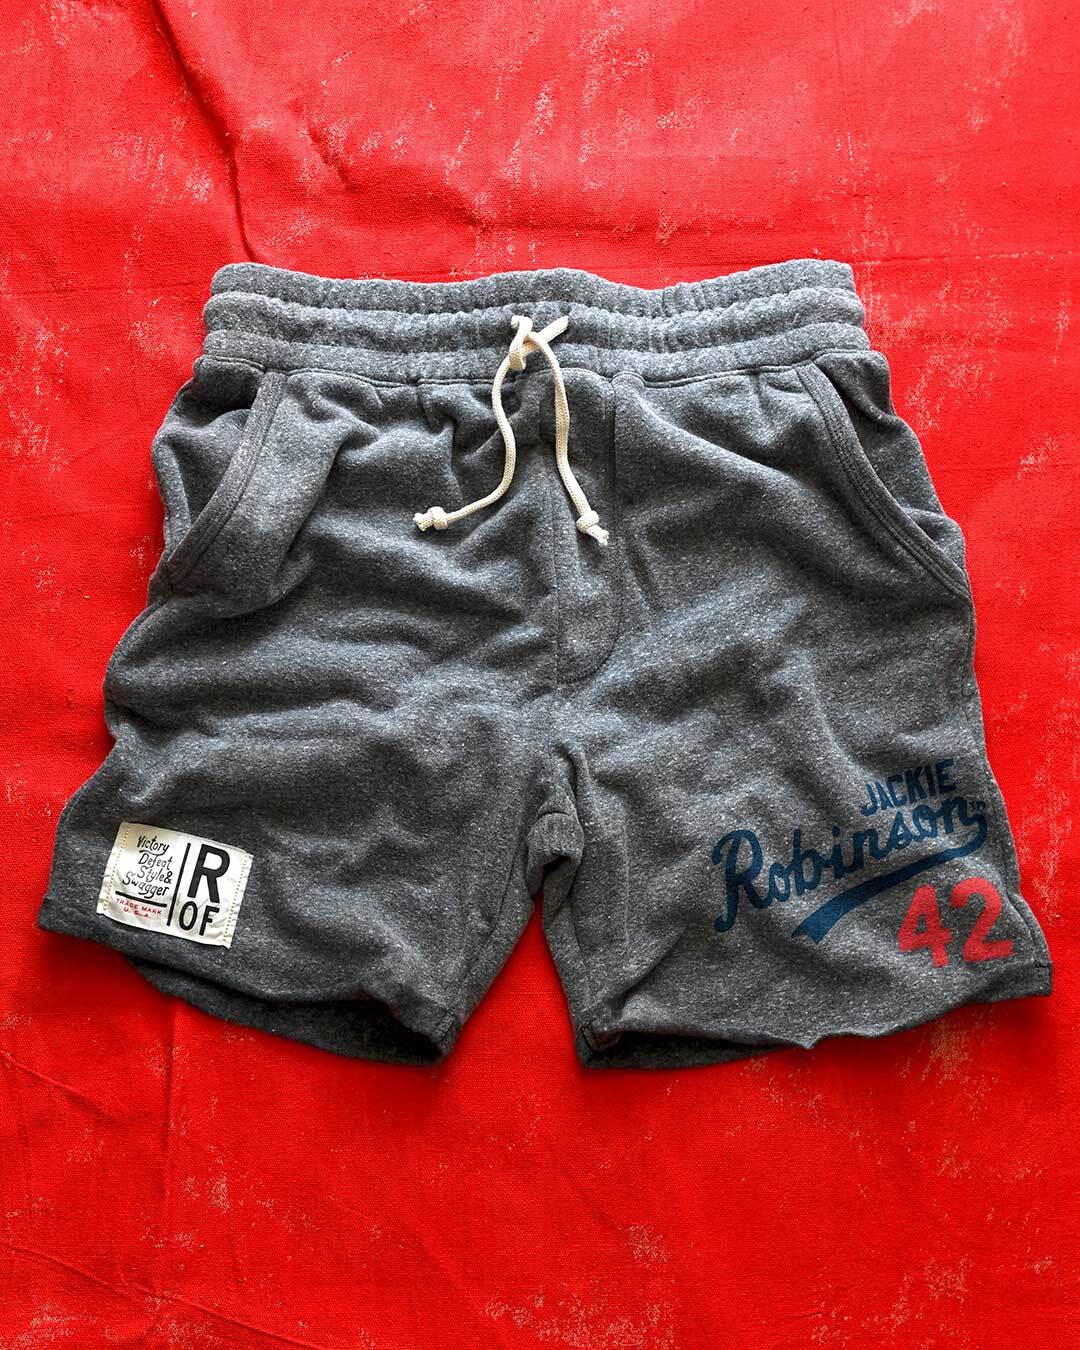 Jackie Robinson #42 Classic Grey Shorts - Roots of Fight Canada